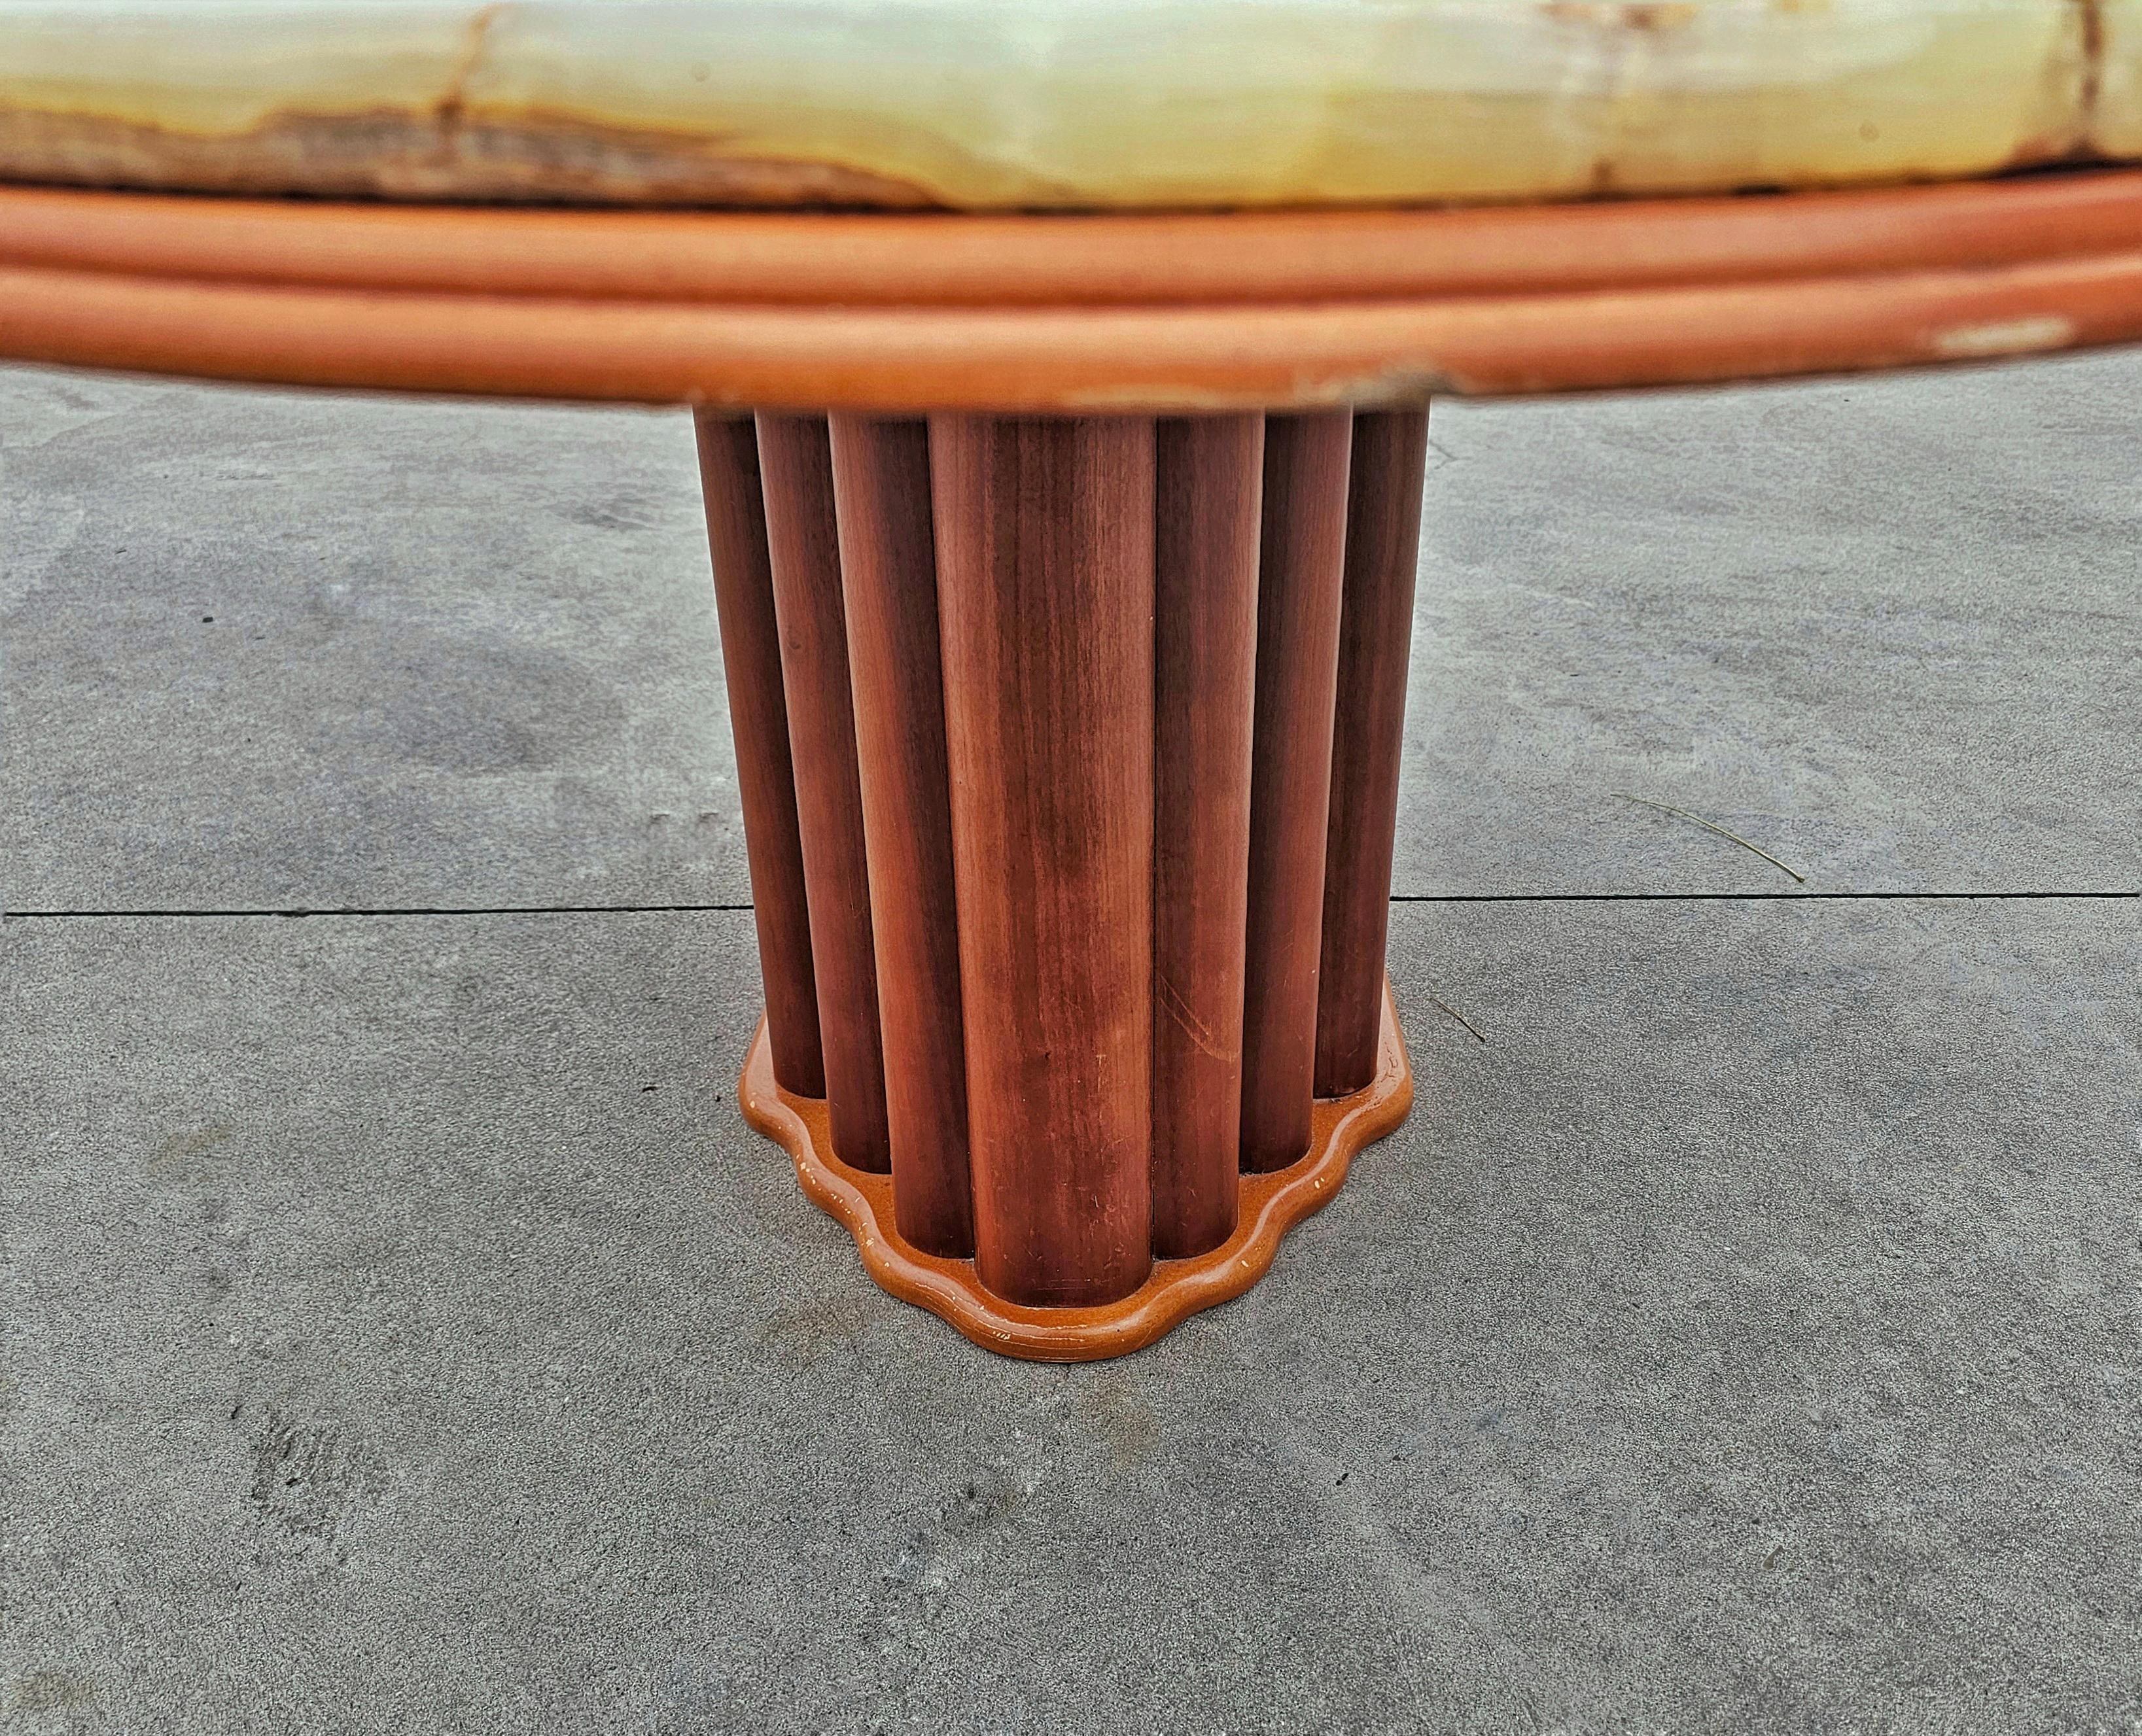 Art Deco Inspired Coffee Table with Onyx Top by Hohnert Design, Germany 1970s For Sale 10